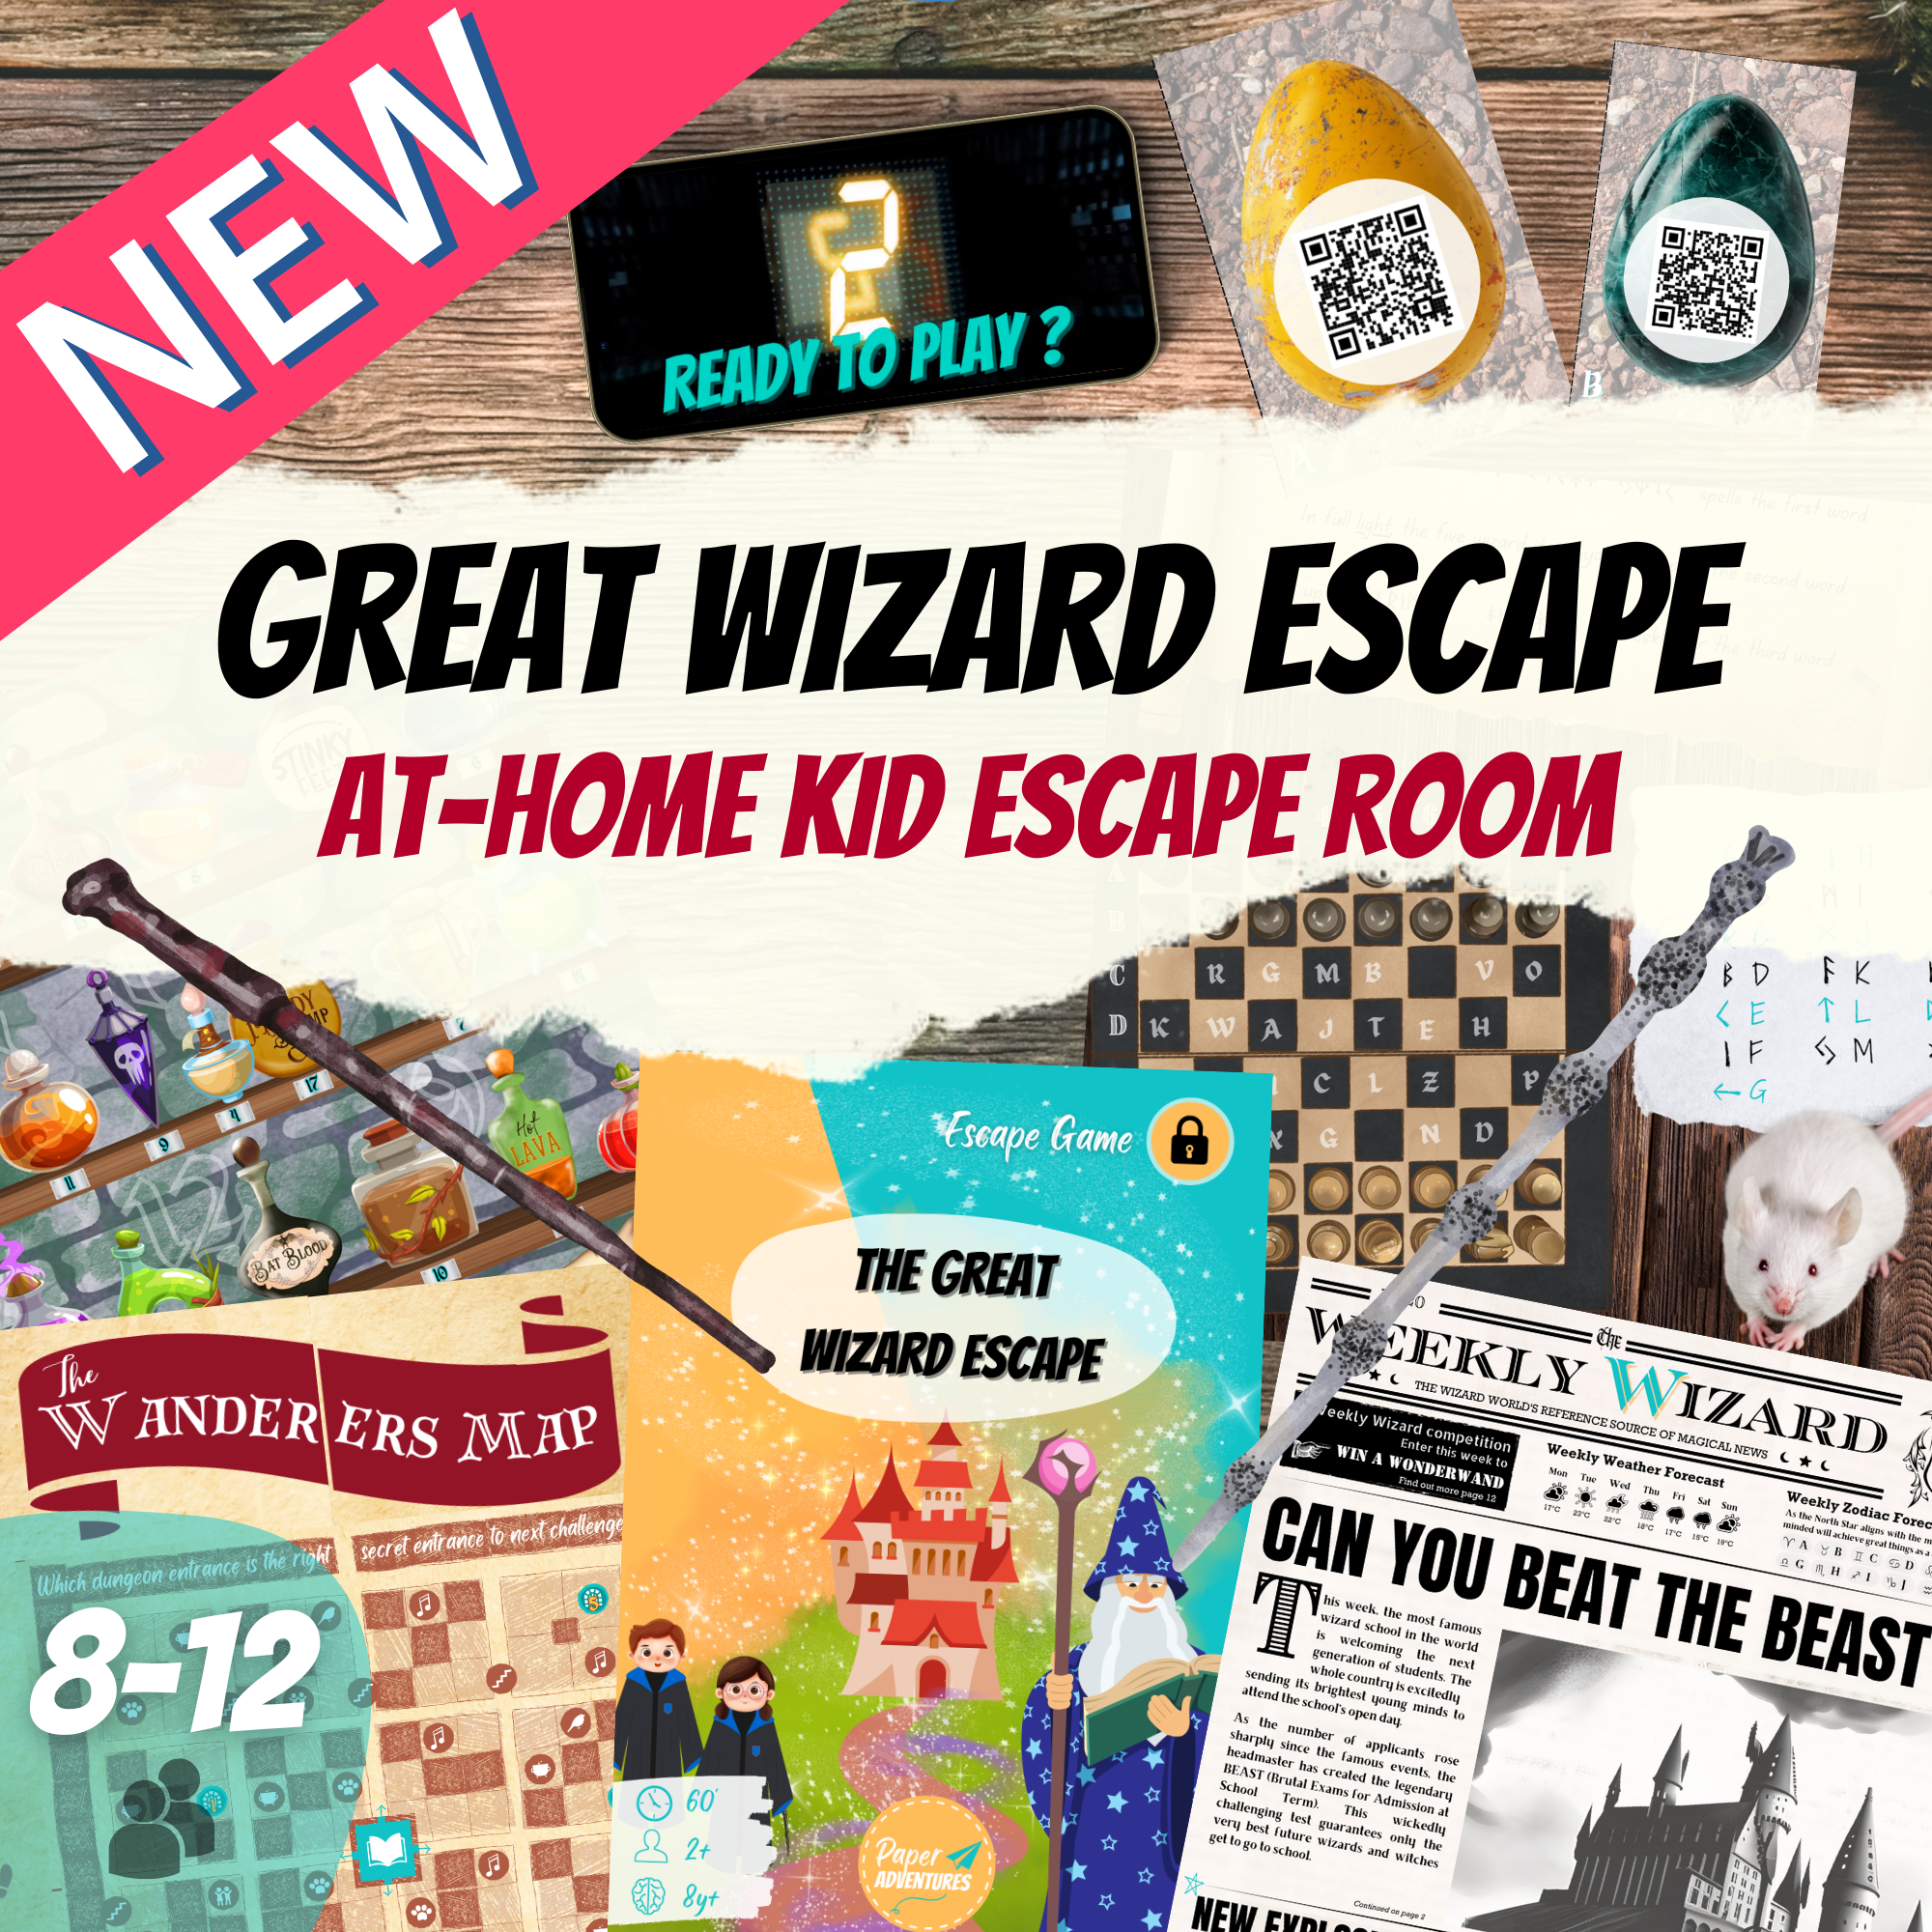 Play at home escape room games I For Children and Adults I